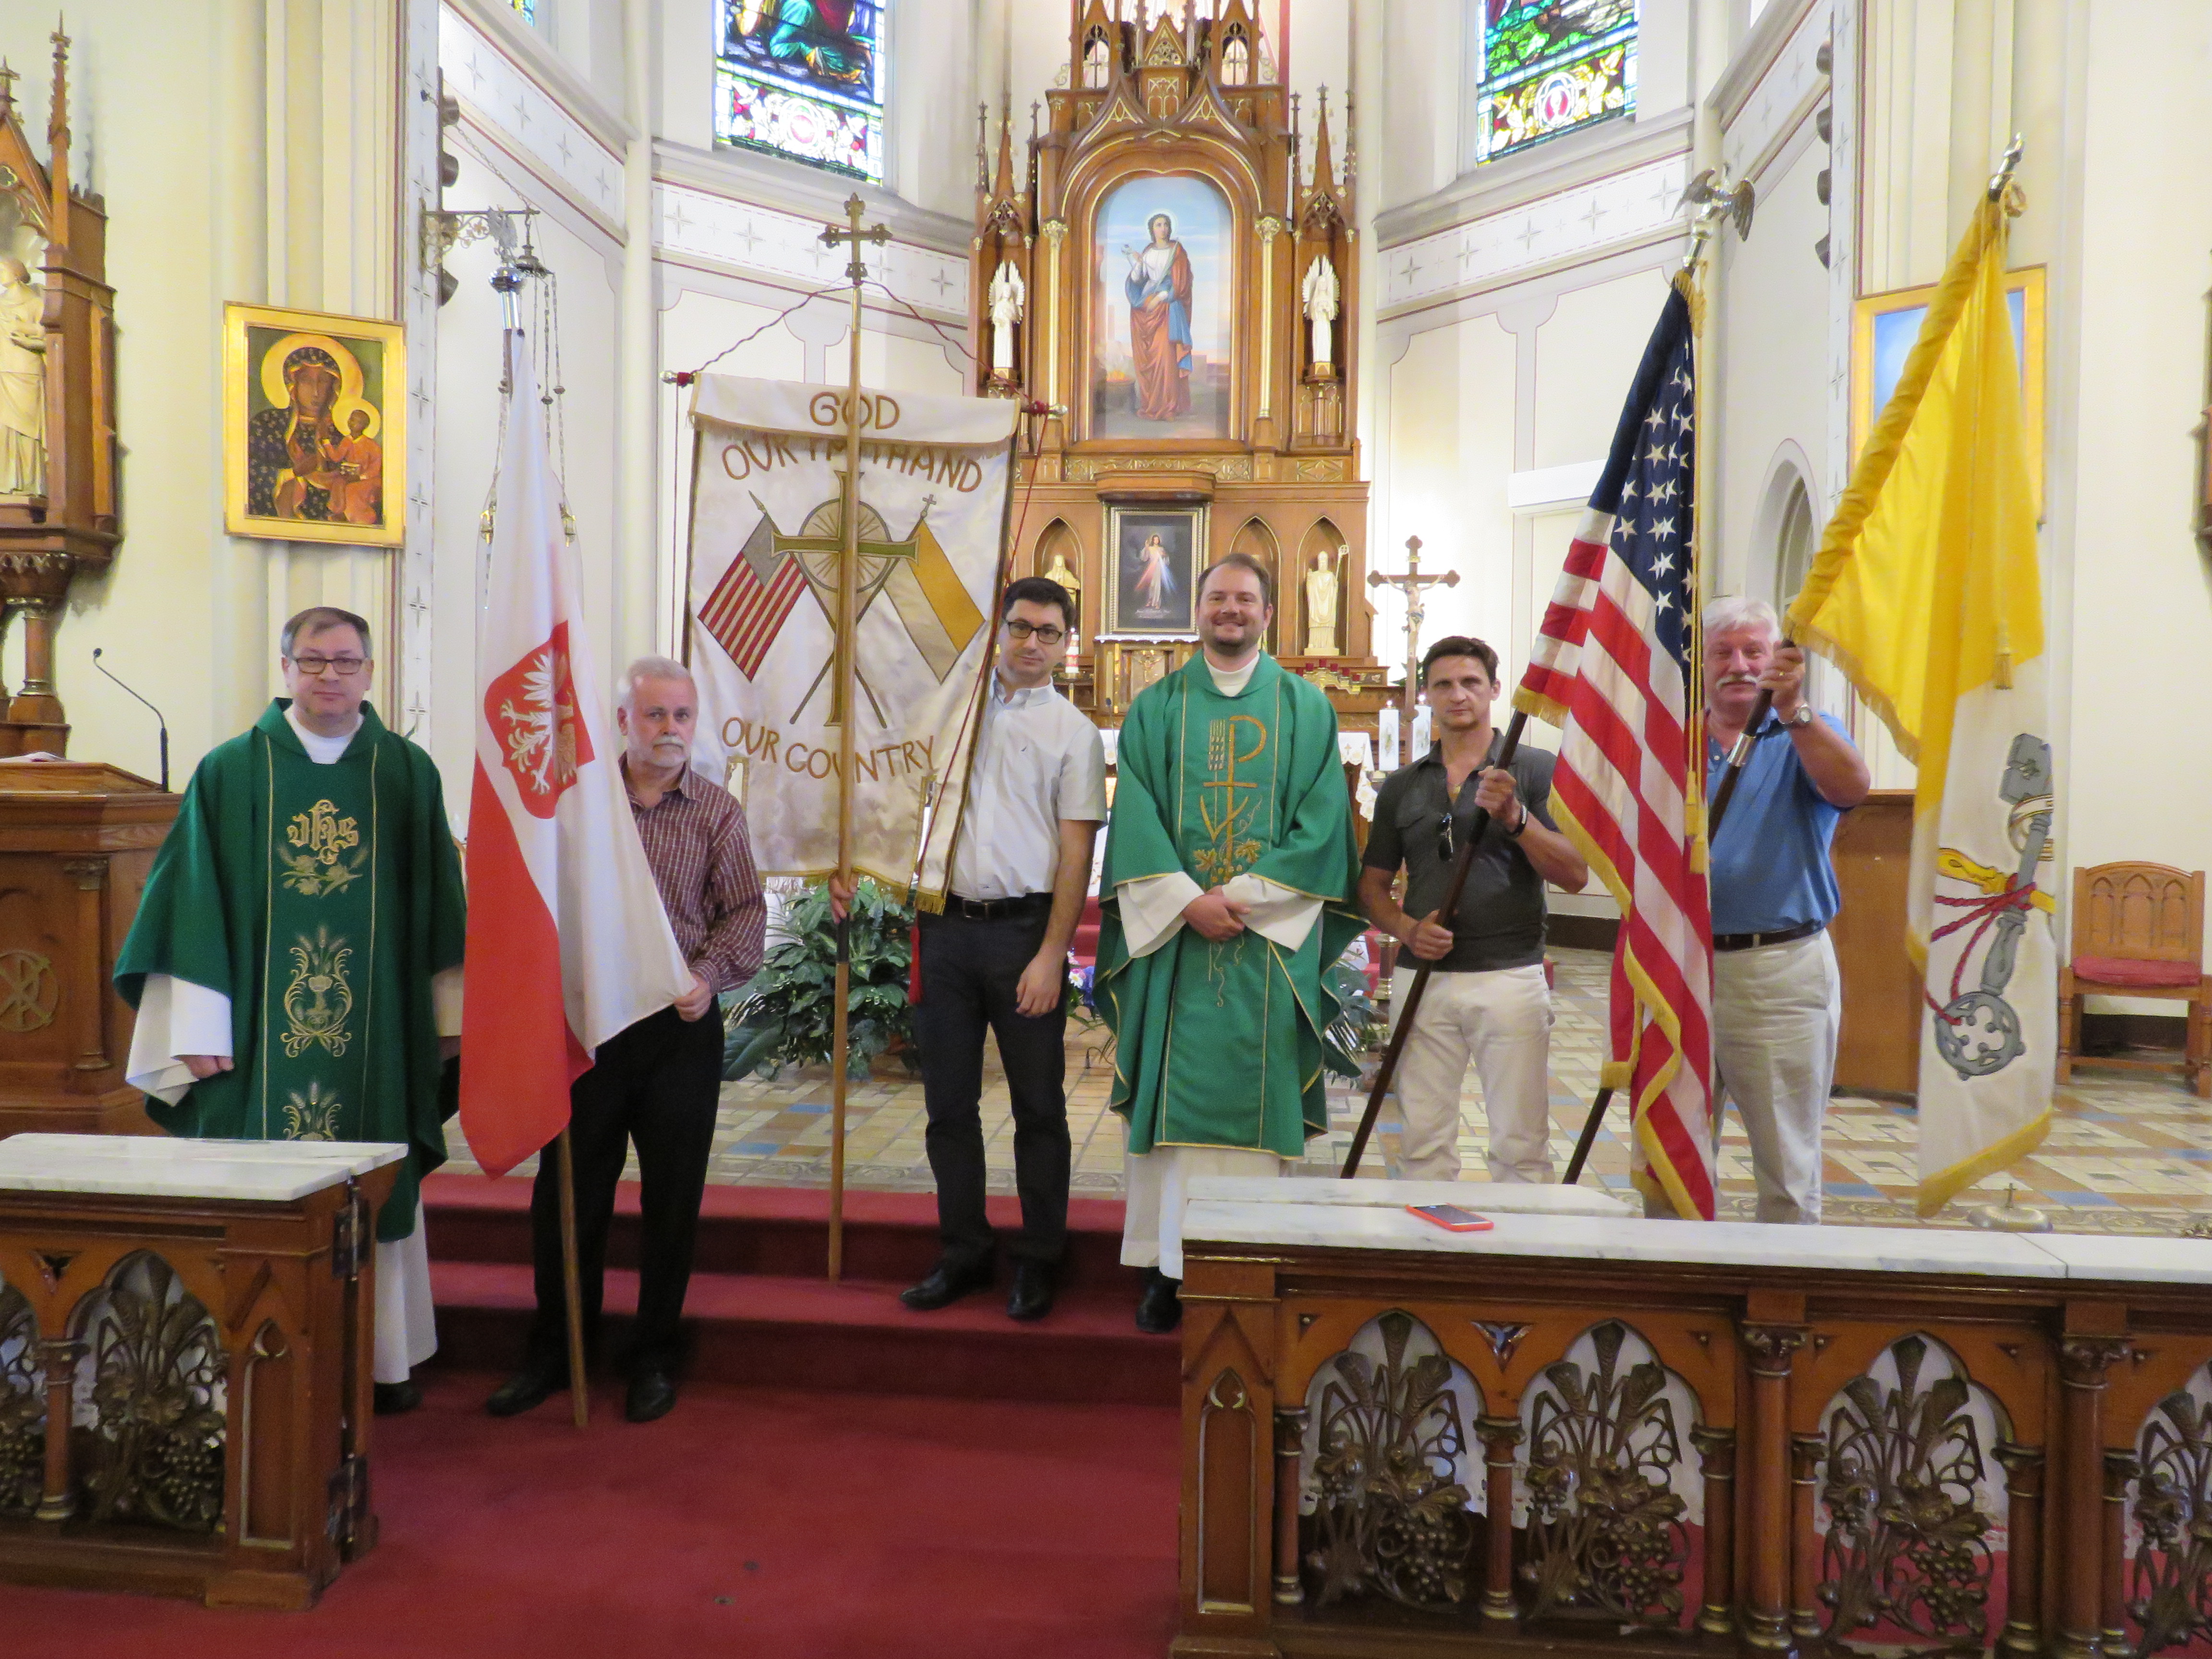 July 5 – After the Mass for Our Country (Fourth of July Celebration).